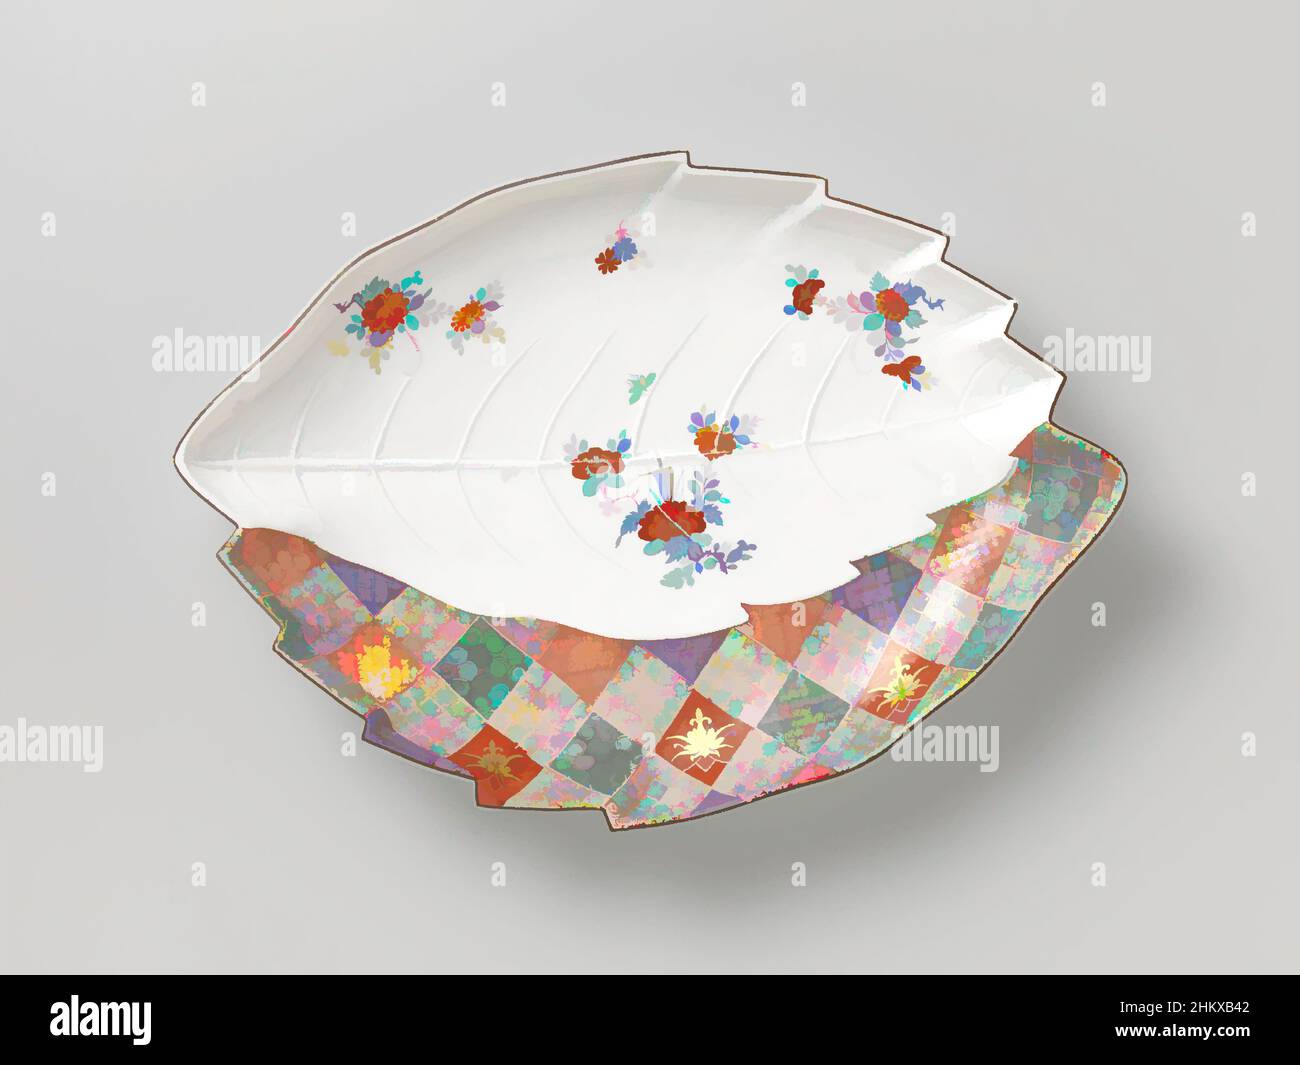 Art inspired by Dish, multicolored painted with a Kakiemon and an Imari decor, Dish of painted porcelain. The dish is in the form of two partially covering leaves. The rim is partially sharply serrated. One leaf has a large vein with side veins and is painted with flower branches. The, Classic works modernized by Artotop with a splash of modernity. Shapes, color and value, eye-catching visual impact on art. Emotions through freedom of artworks in a contemporary way. A timeless message pursuing a wildly creative new direction. Artists turning to the digital medium and creating the Artotop NFT Stock Photo